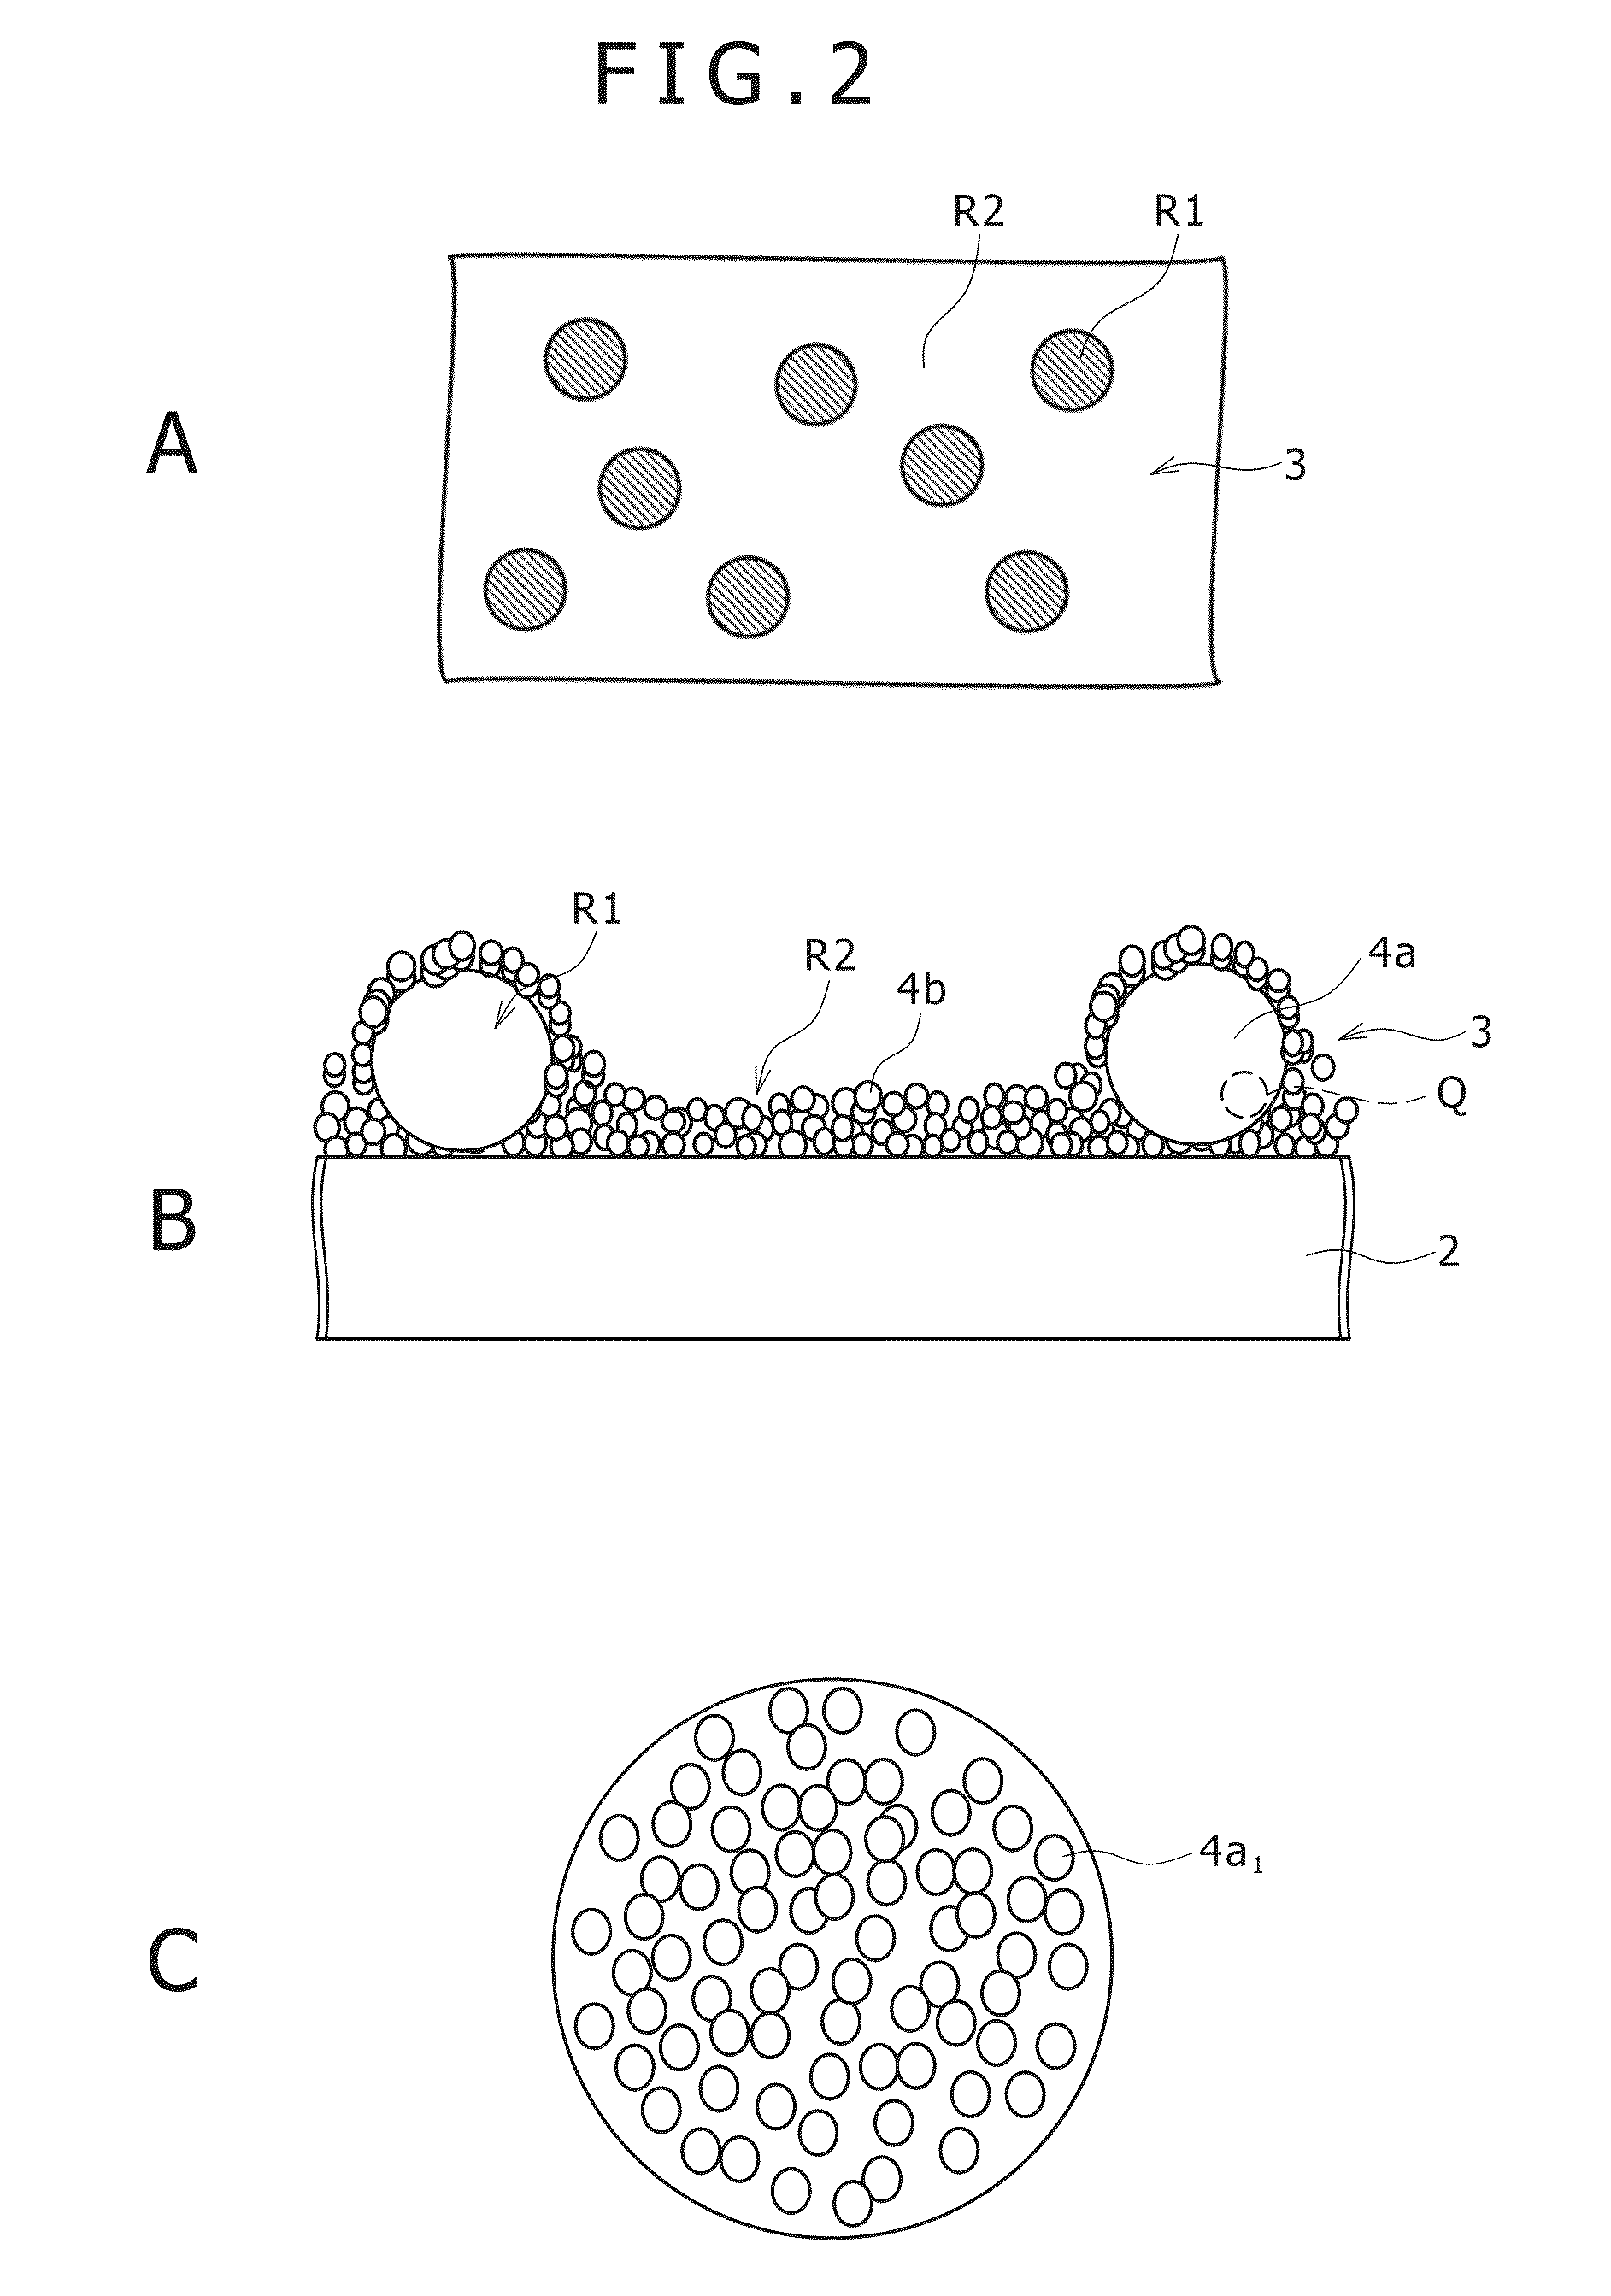 Separator, battery, battery pack, electronic apparatus, electric vehicle, electric storage device, and power system